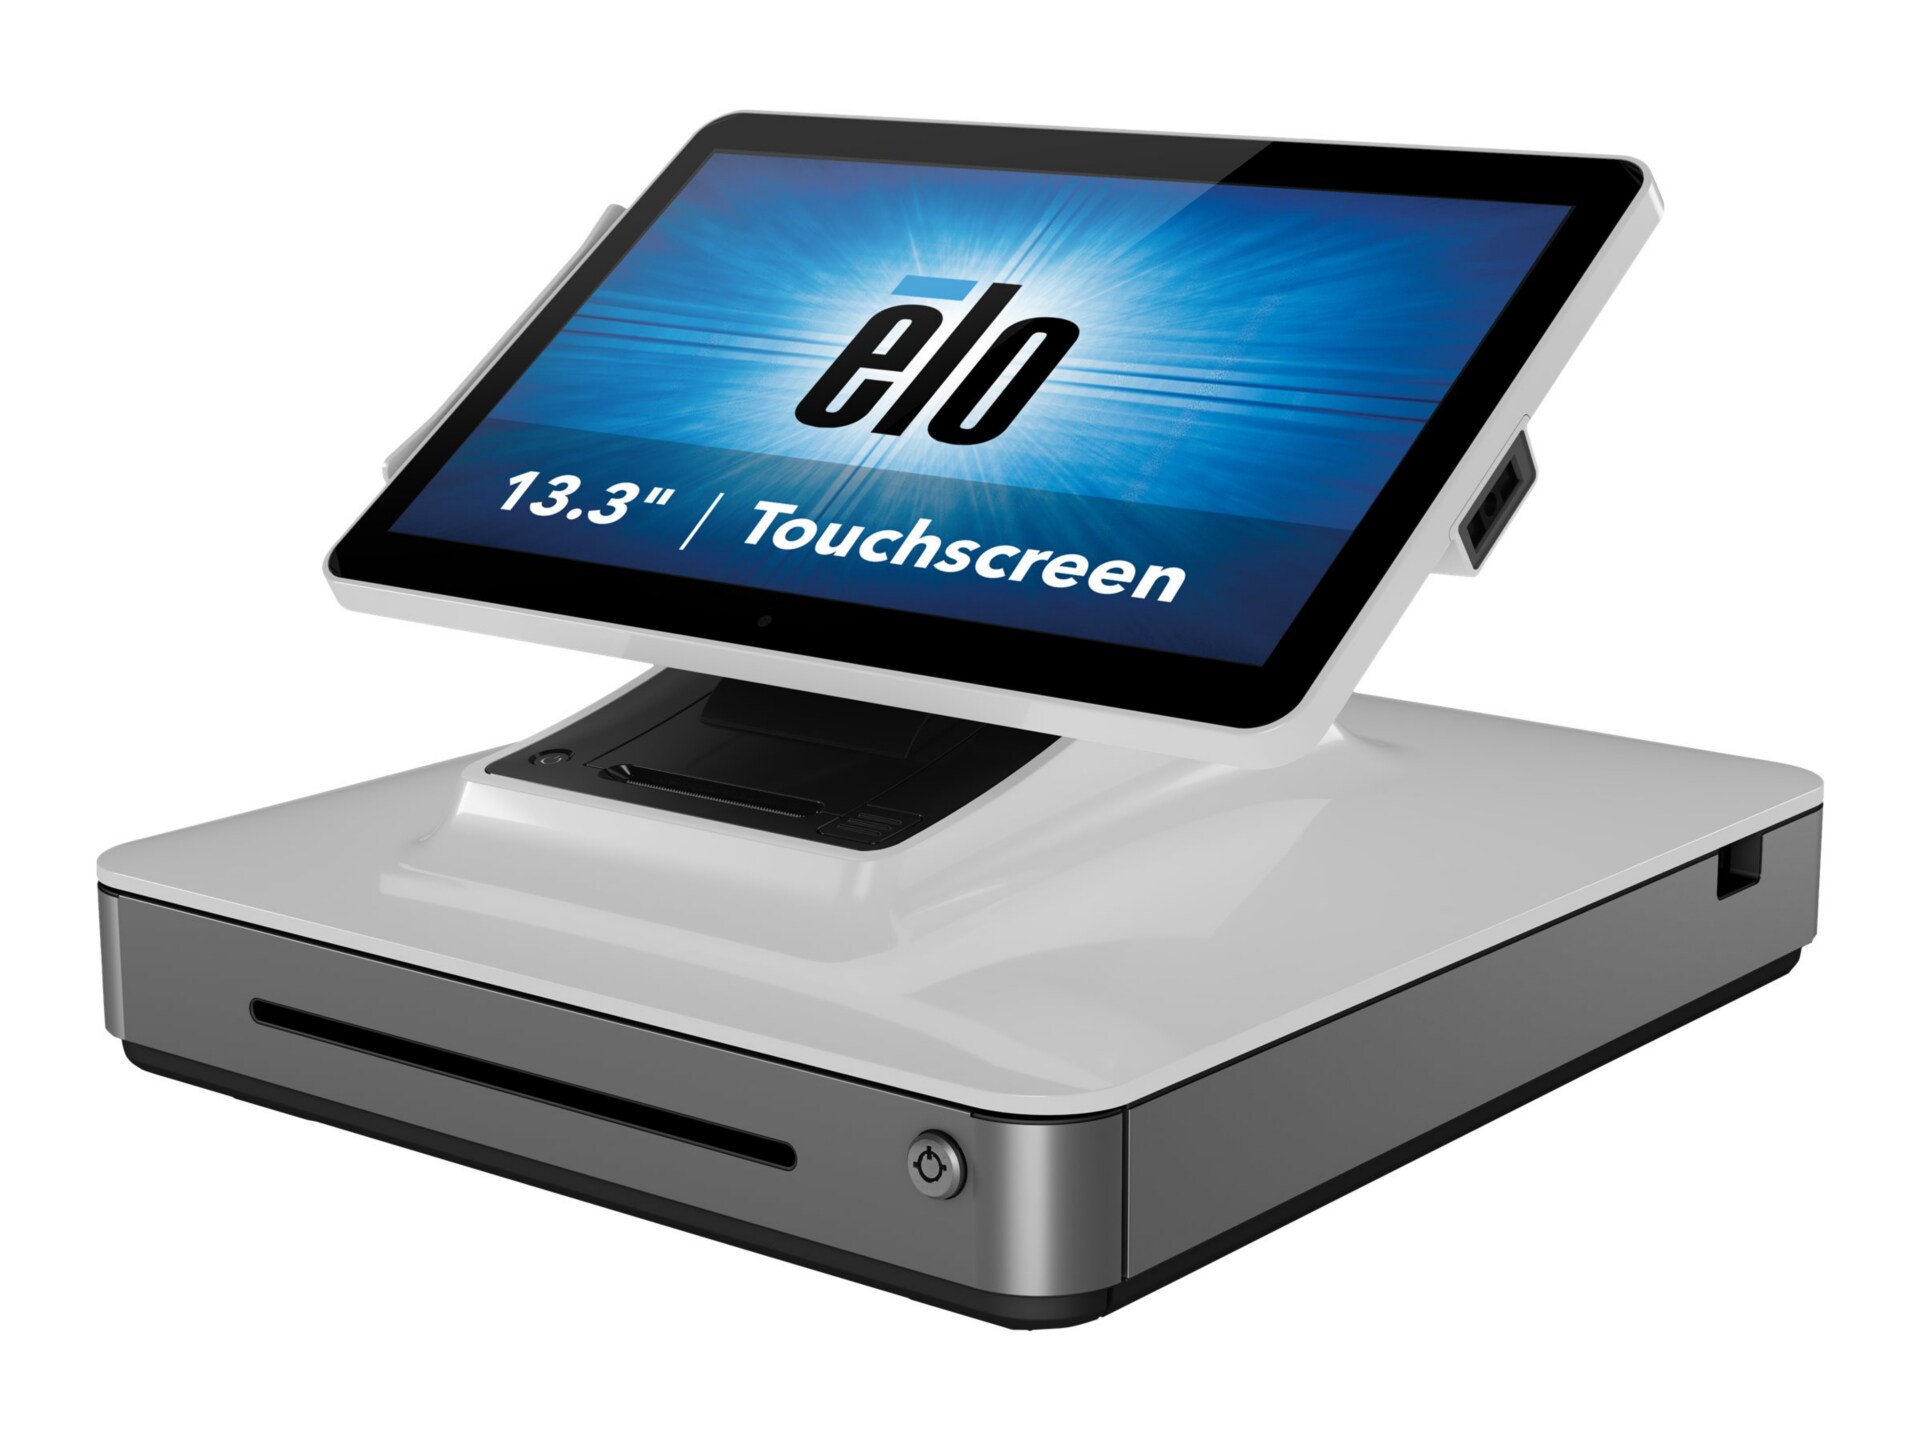 Elo PayPoint - all-in-one - Snapdragon 2 GHz - 3 GB - 32 GB - LED 13.3"